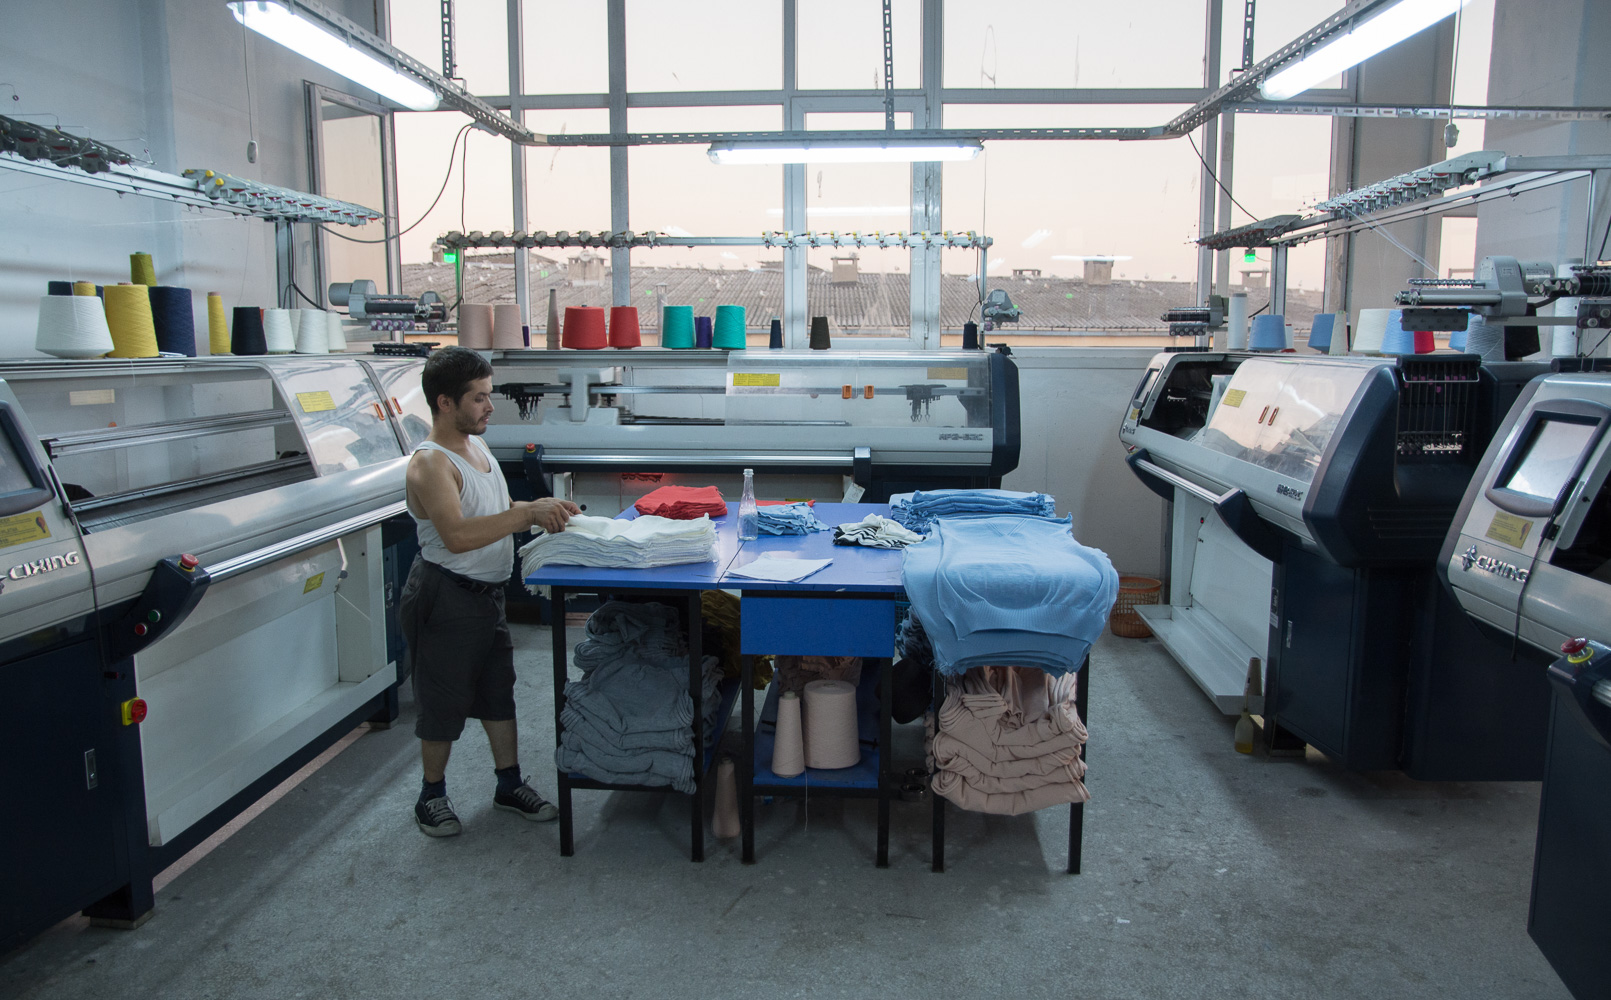 A small independent factory set up by a former garment worker, making fake brand clothing